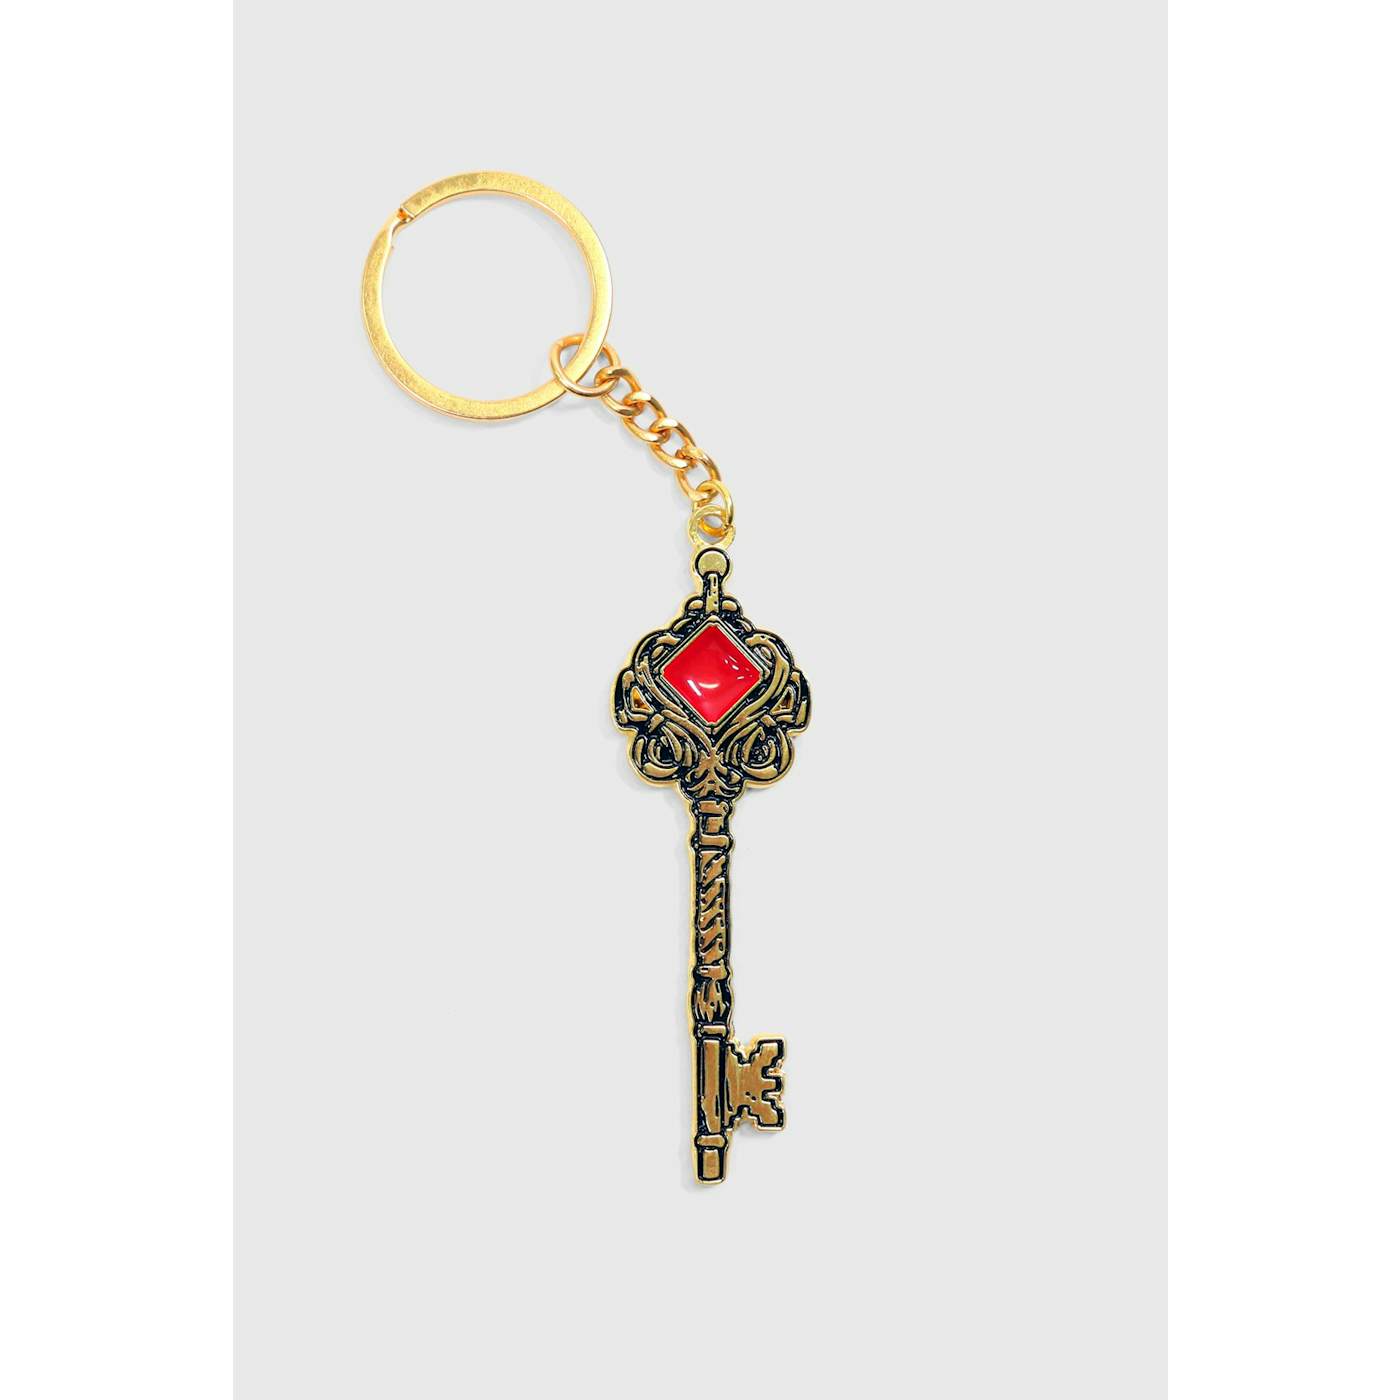 Joey Graceffa The Collectors Keychain (Limited Edition)